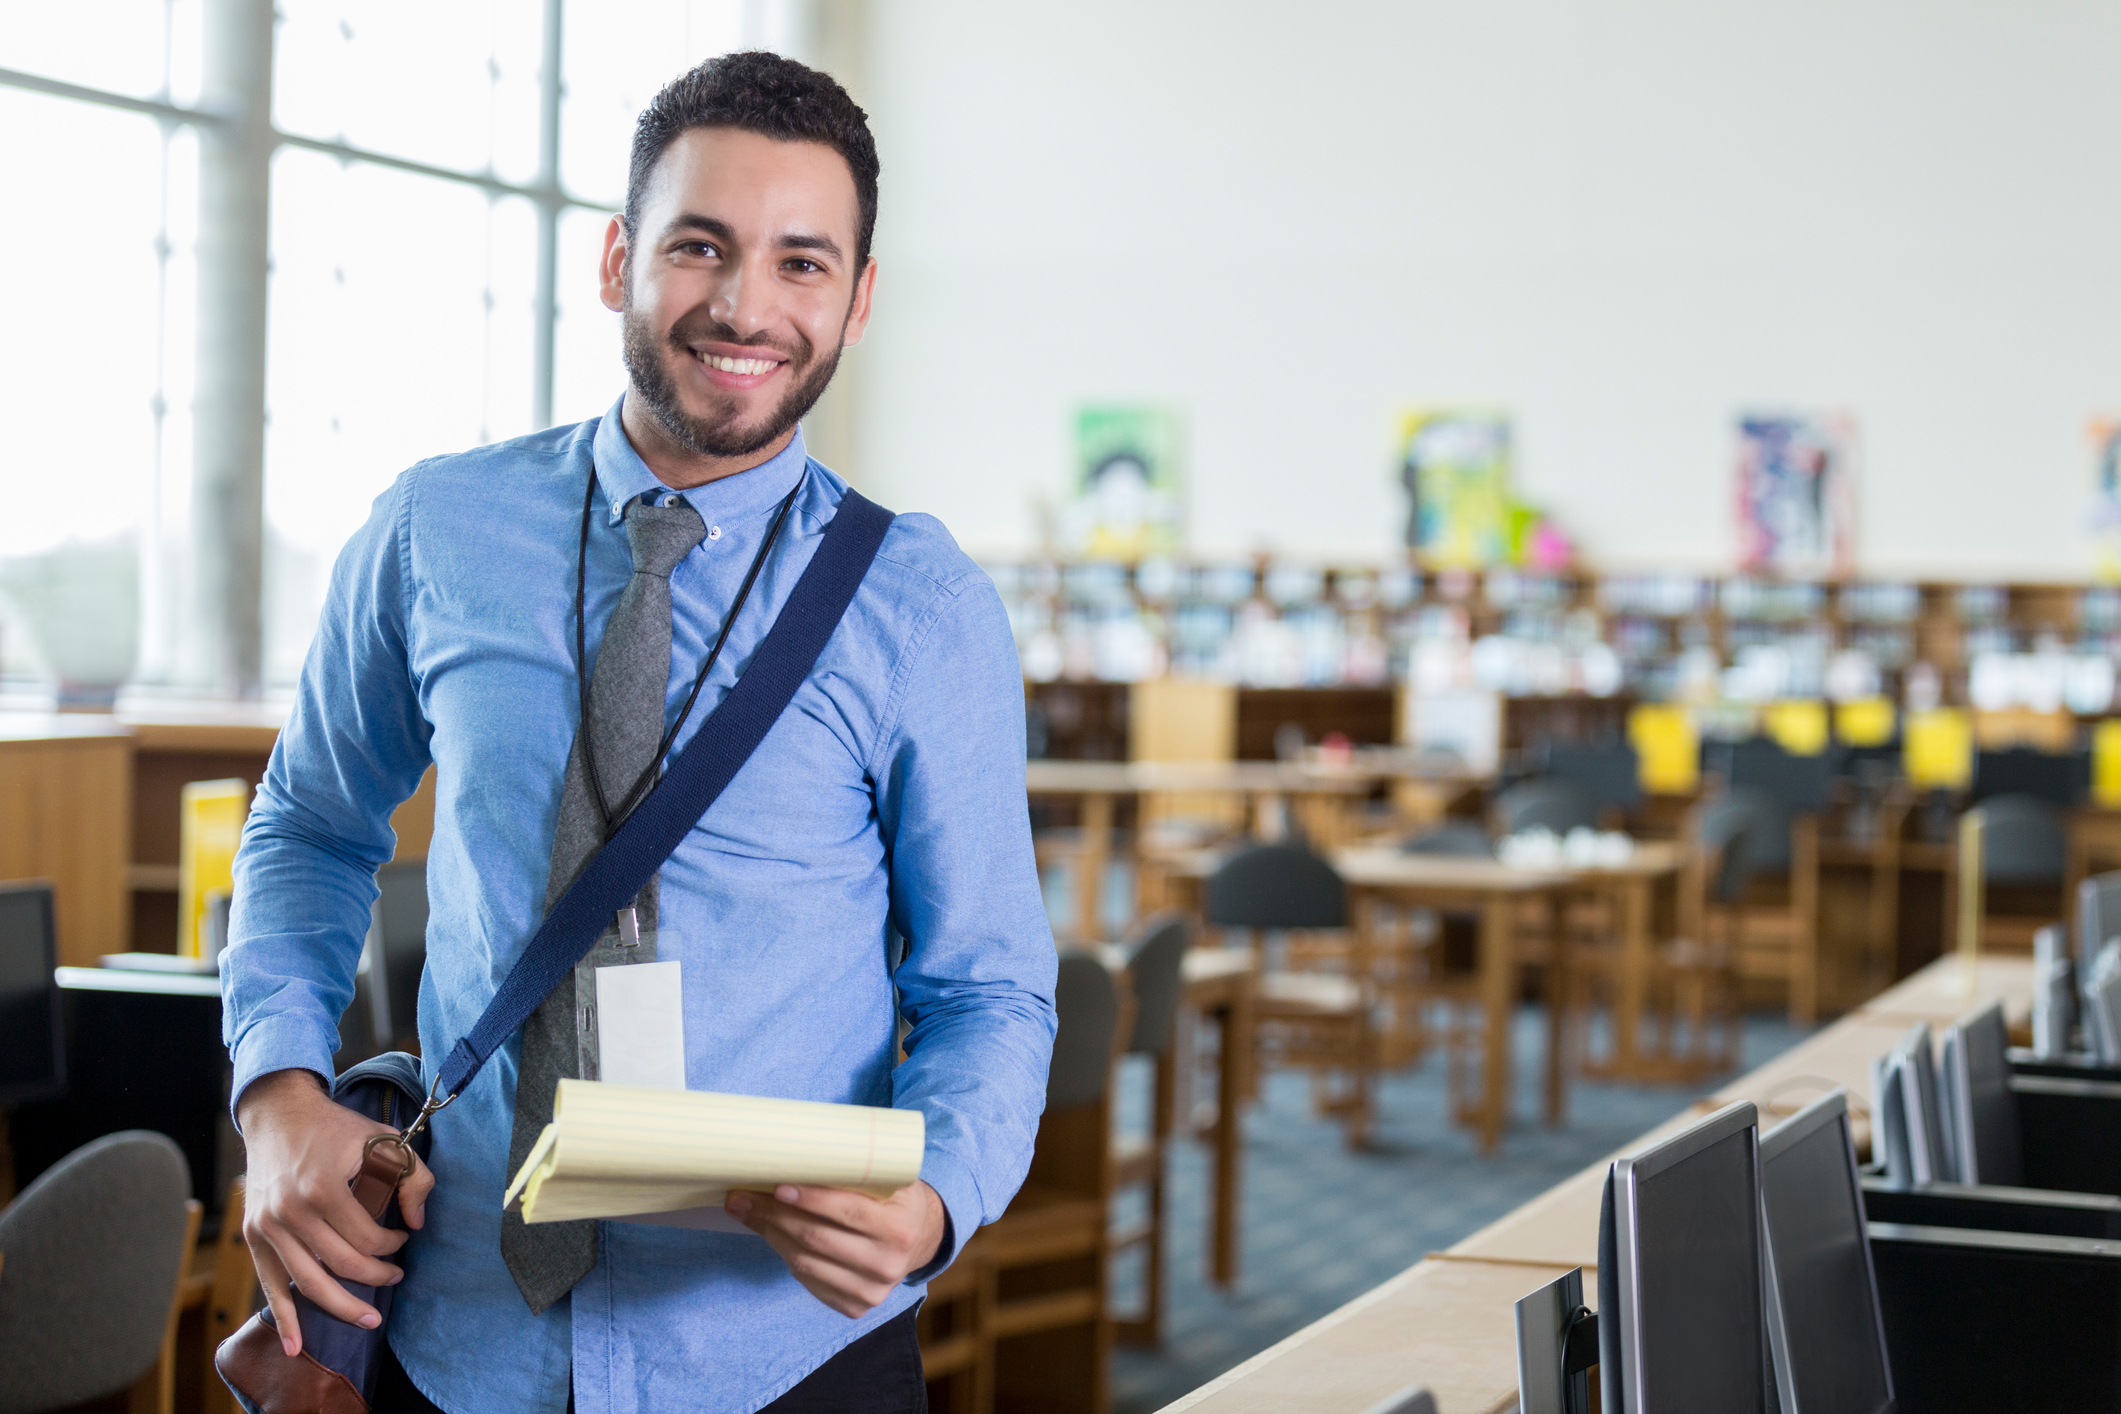 A young male Hispanic school librarian stands proudly in his library with satchel and note pad ready. He smiles for the camera.